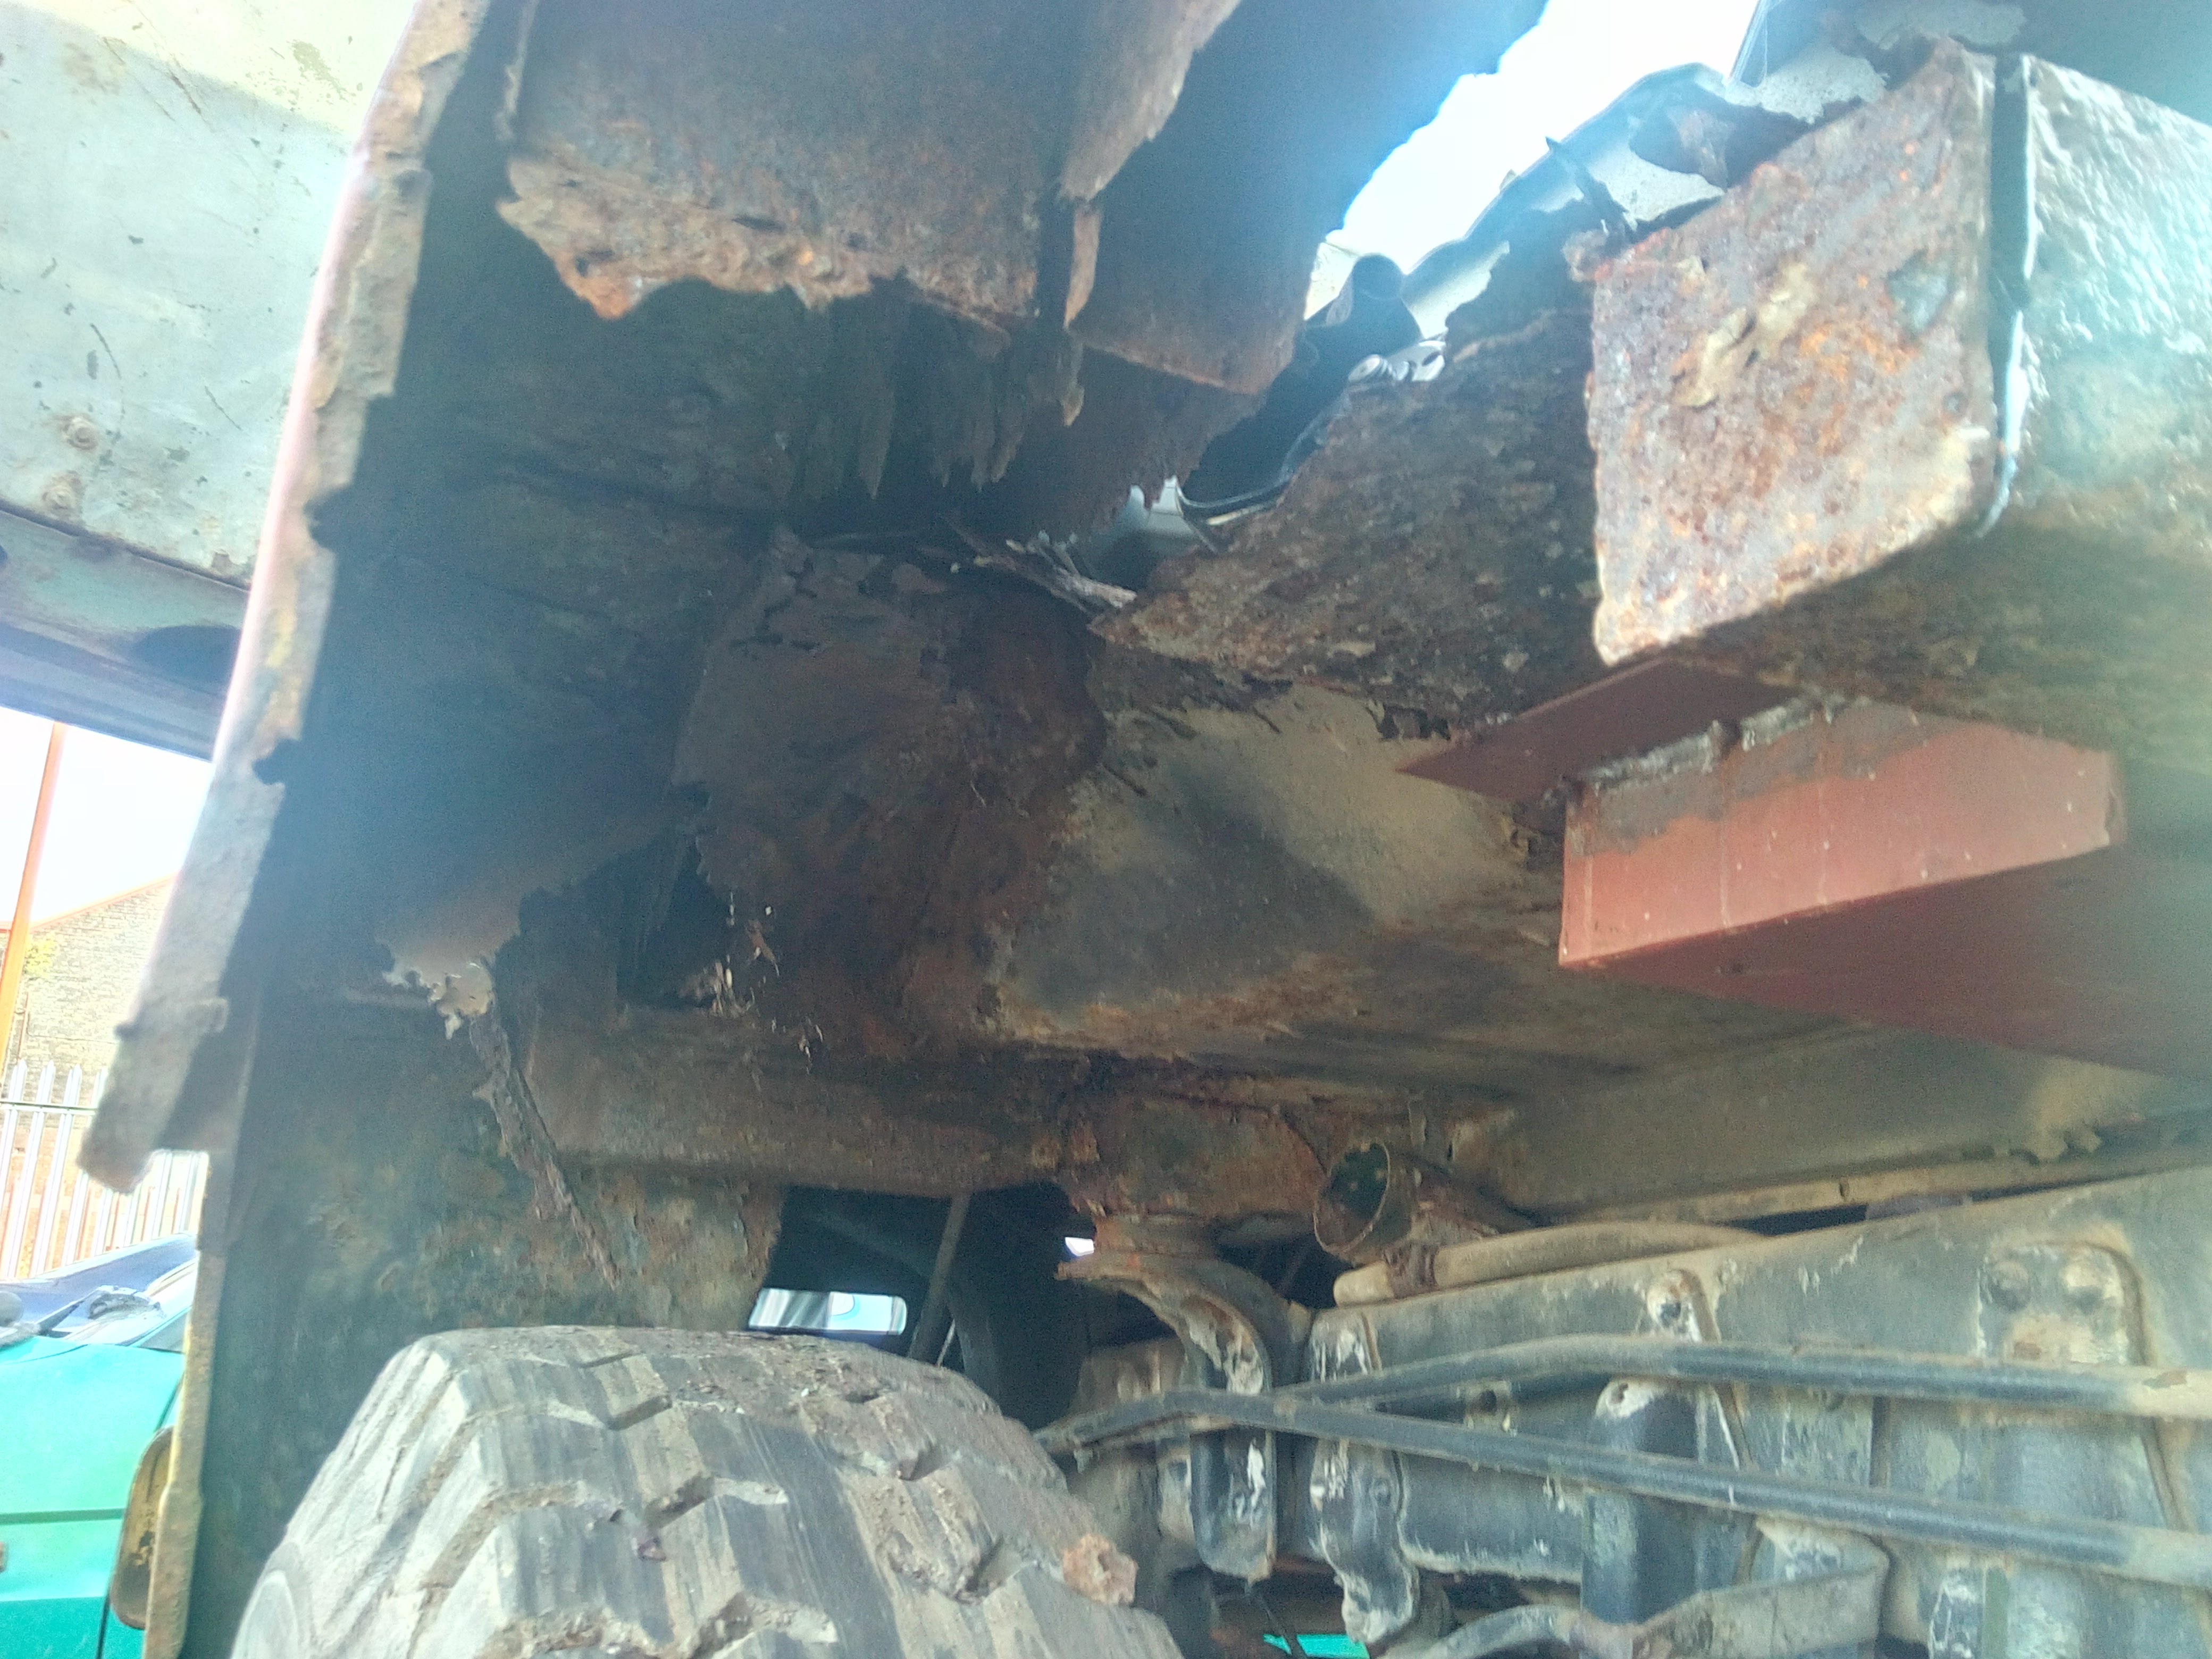 A photograph looking up underneath the passenger's side front
wheel well, showing ragged rotten metal everywhere you look. Large
patches of daylight are visible straight through the truck.